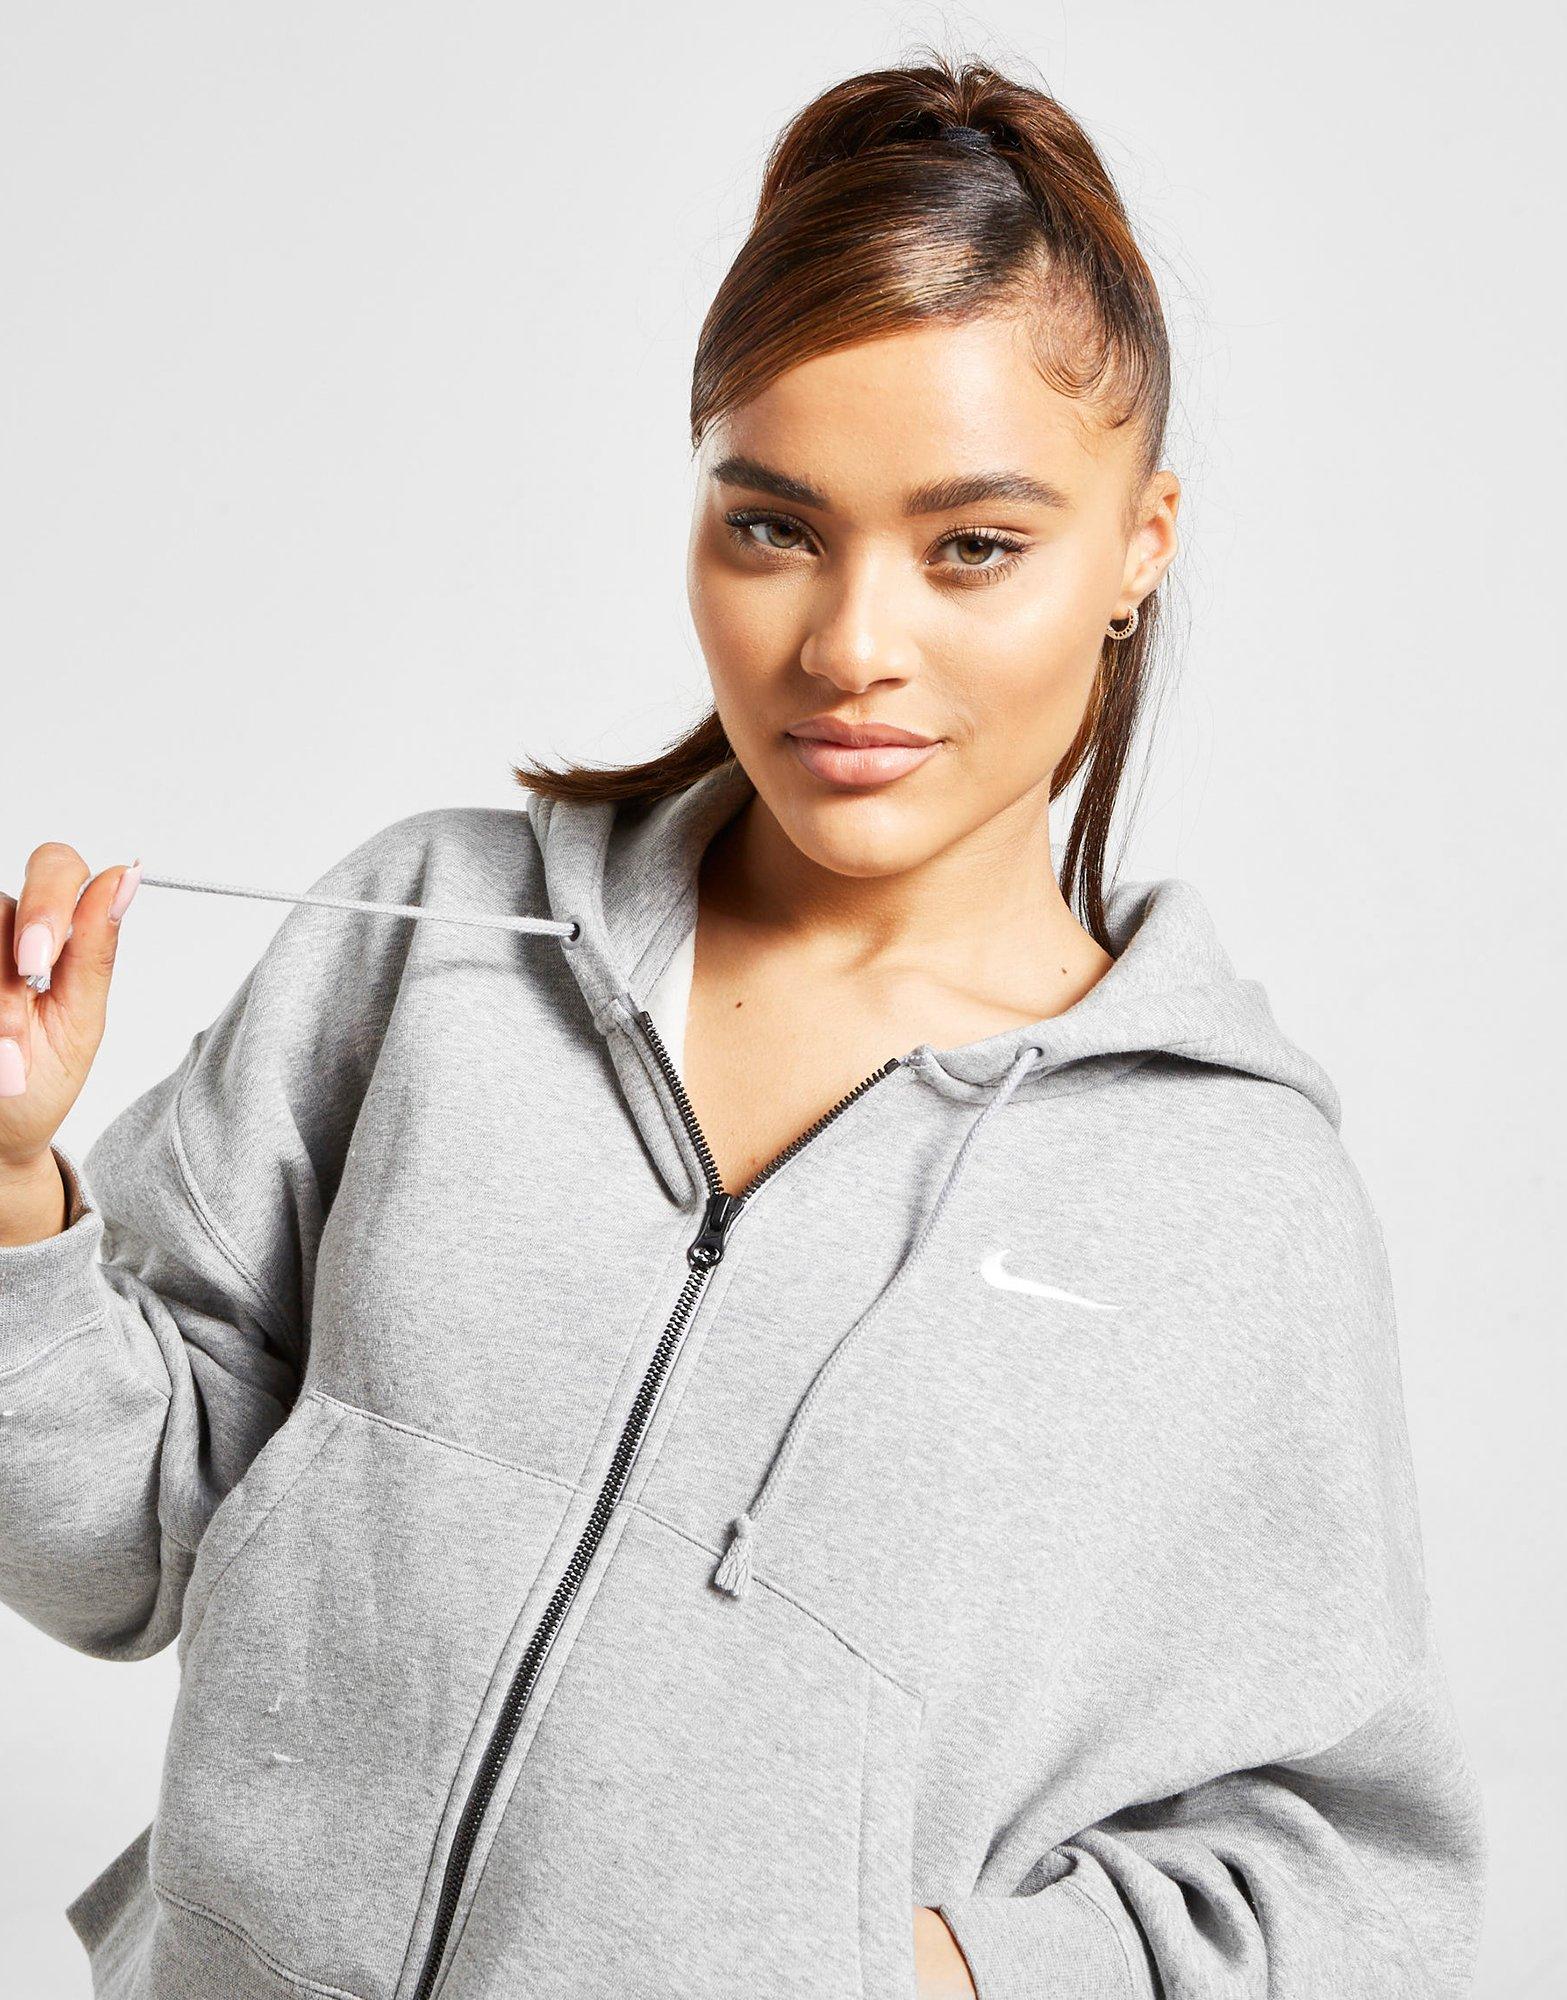 nike jumper with zip